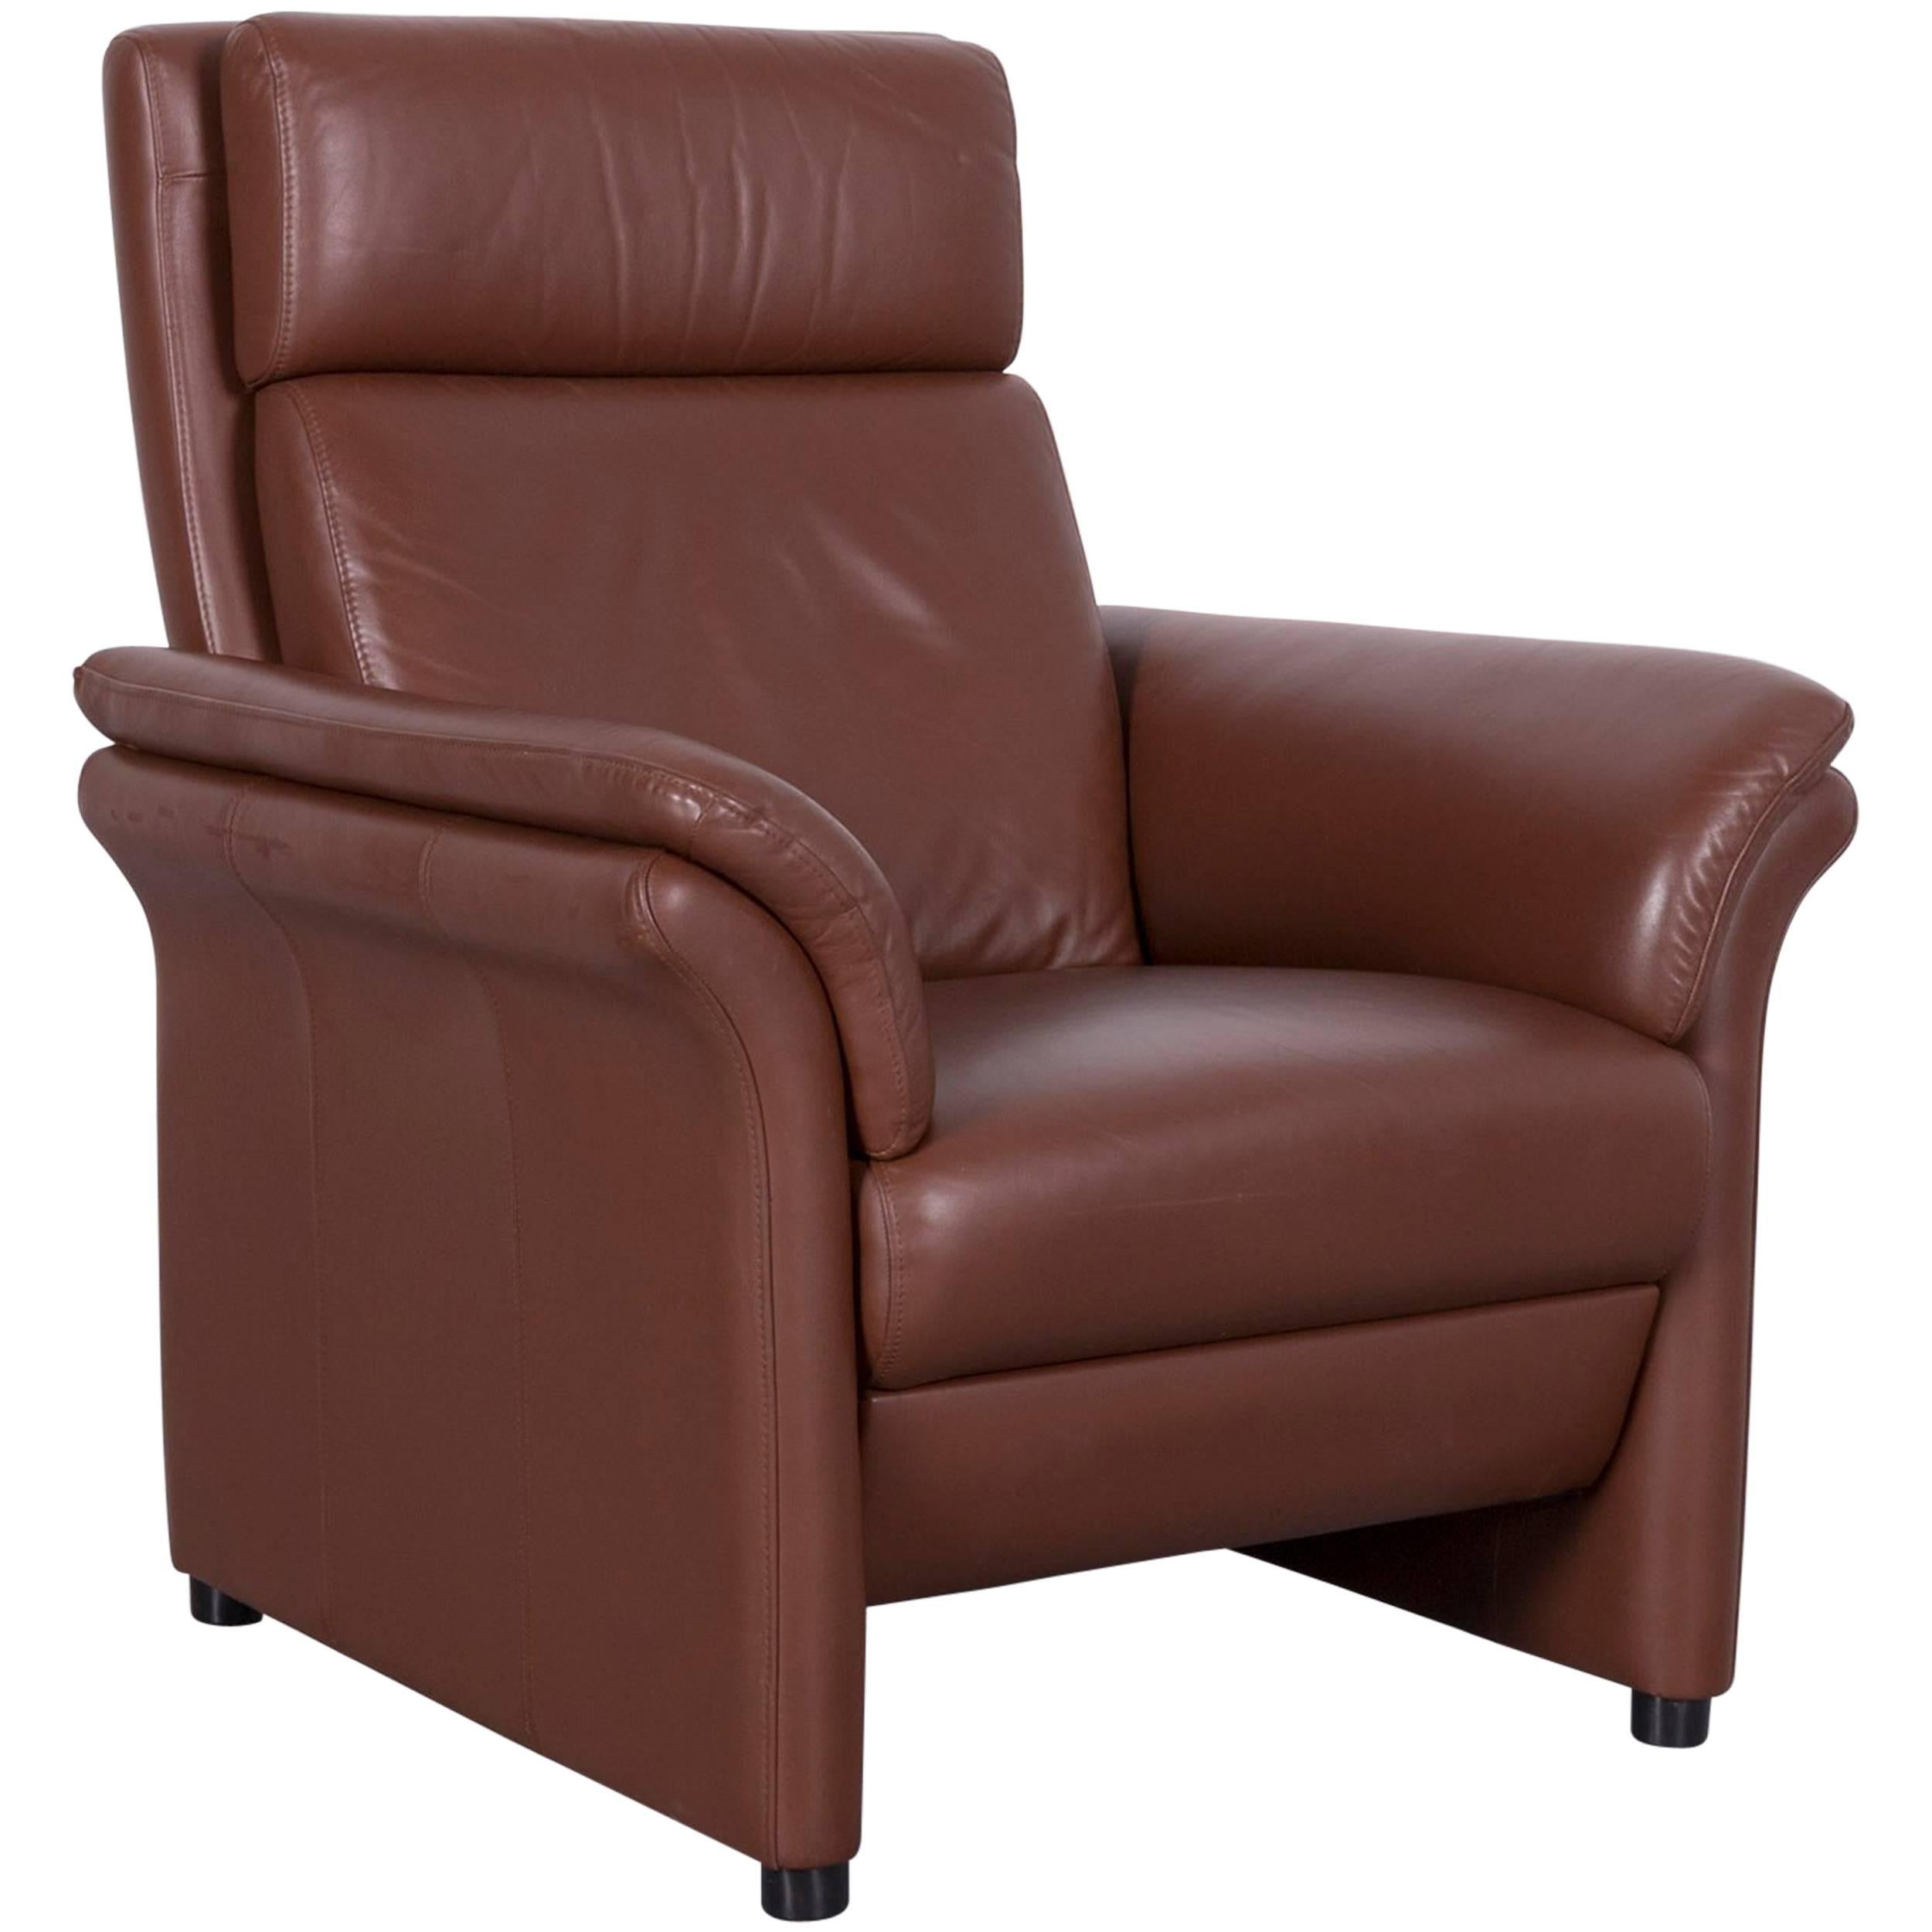 Erpo Designer Leather Armchair Brown One-Seat